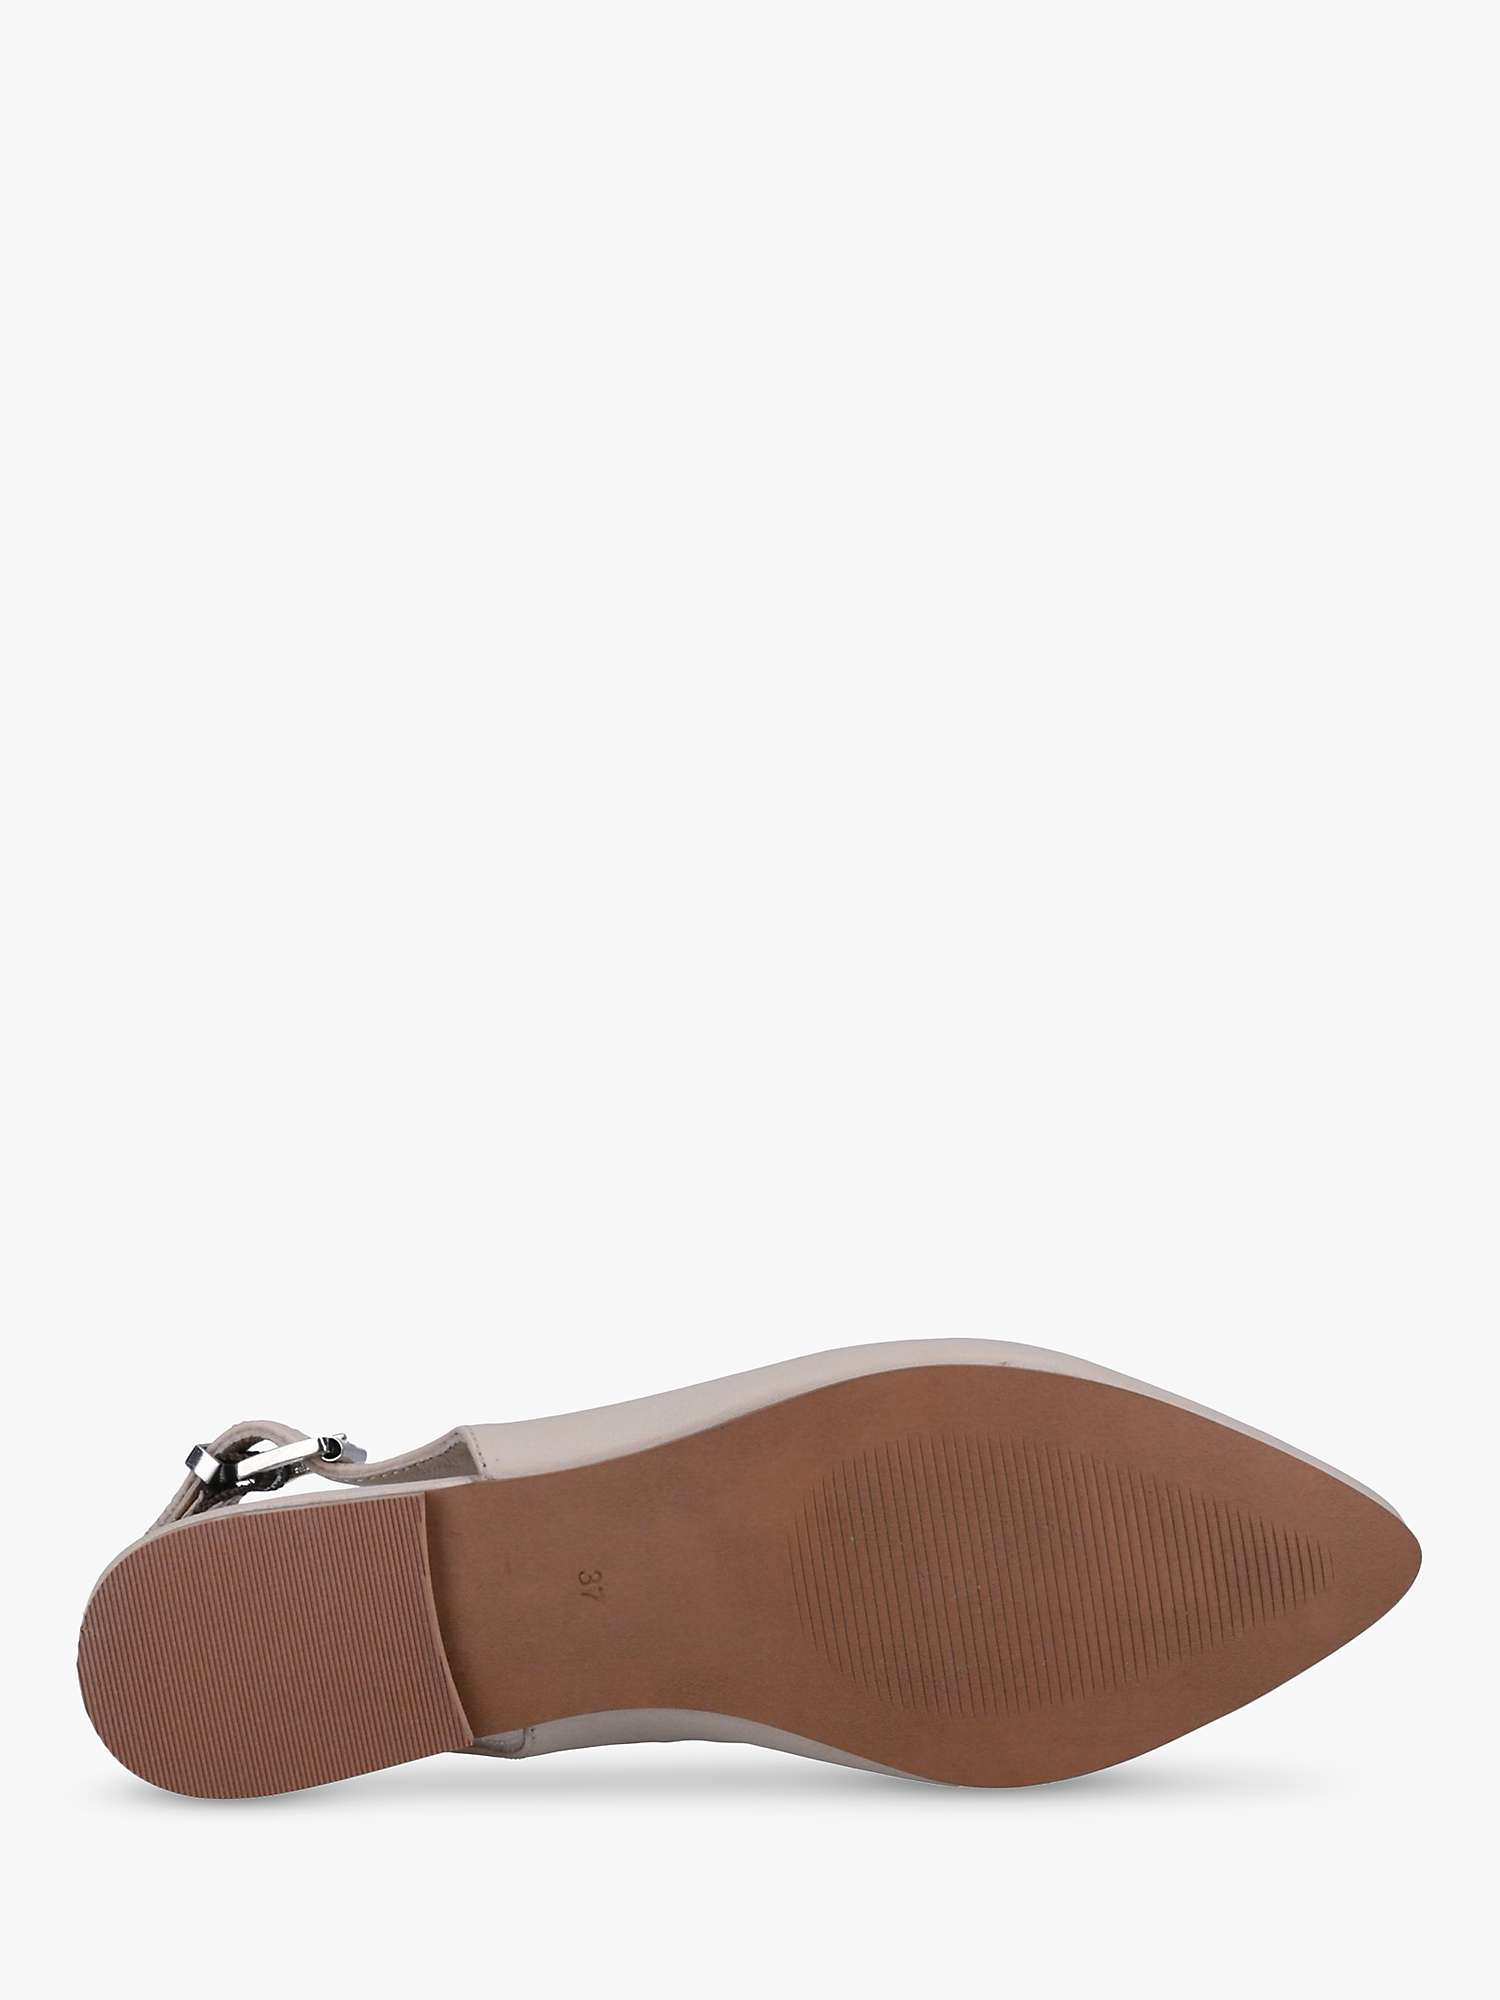 Buy Hush Puppies Demi Leather Slingback Pumps Online at johnlewis.com